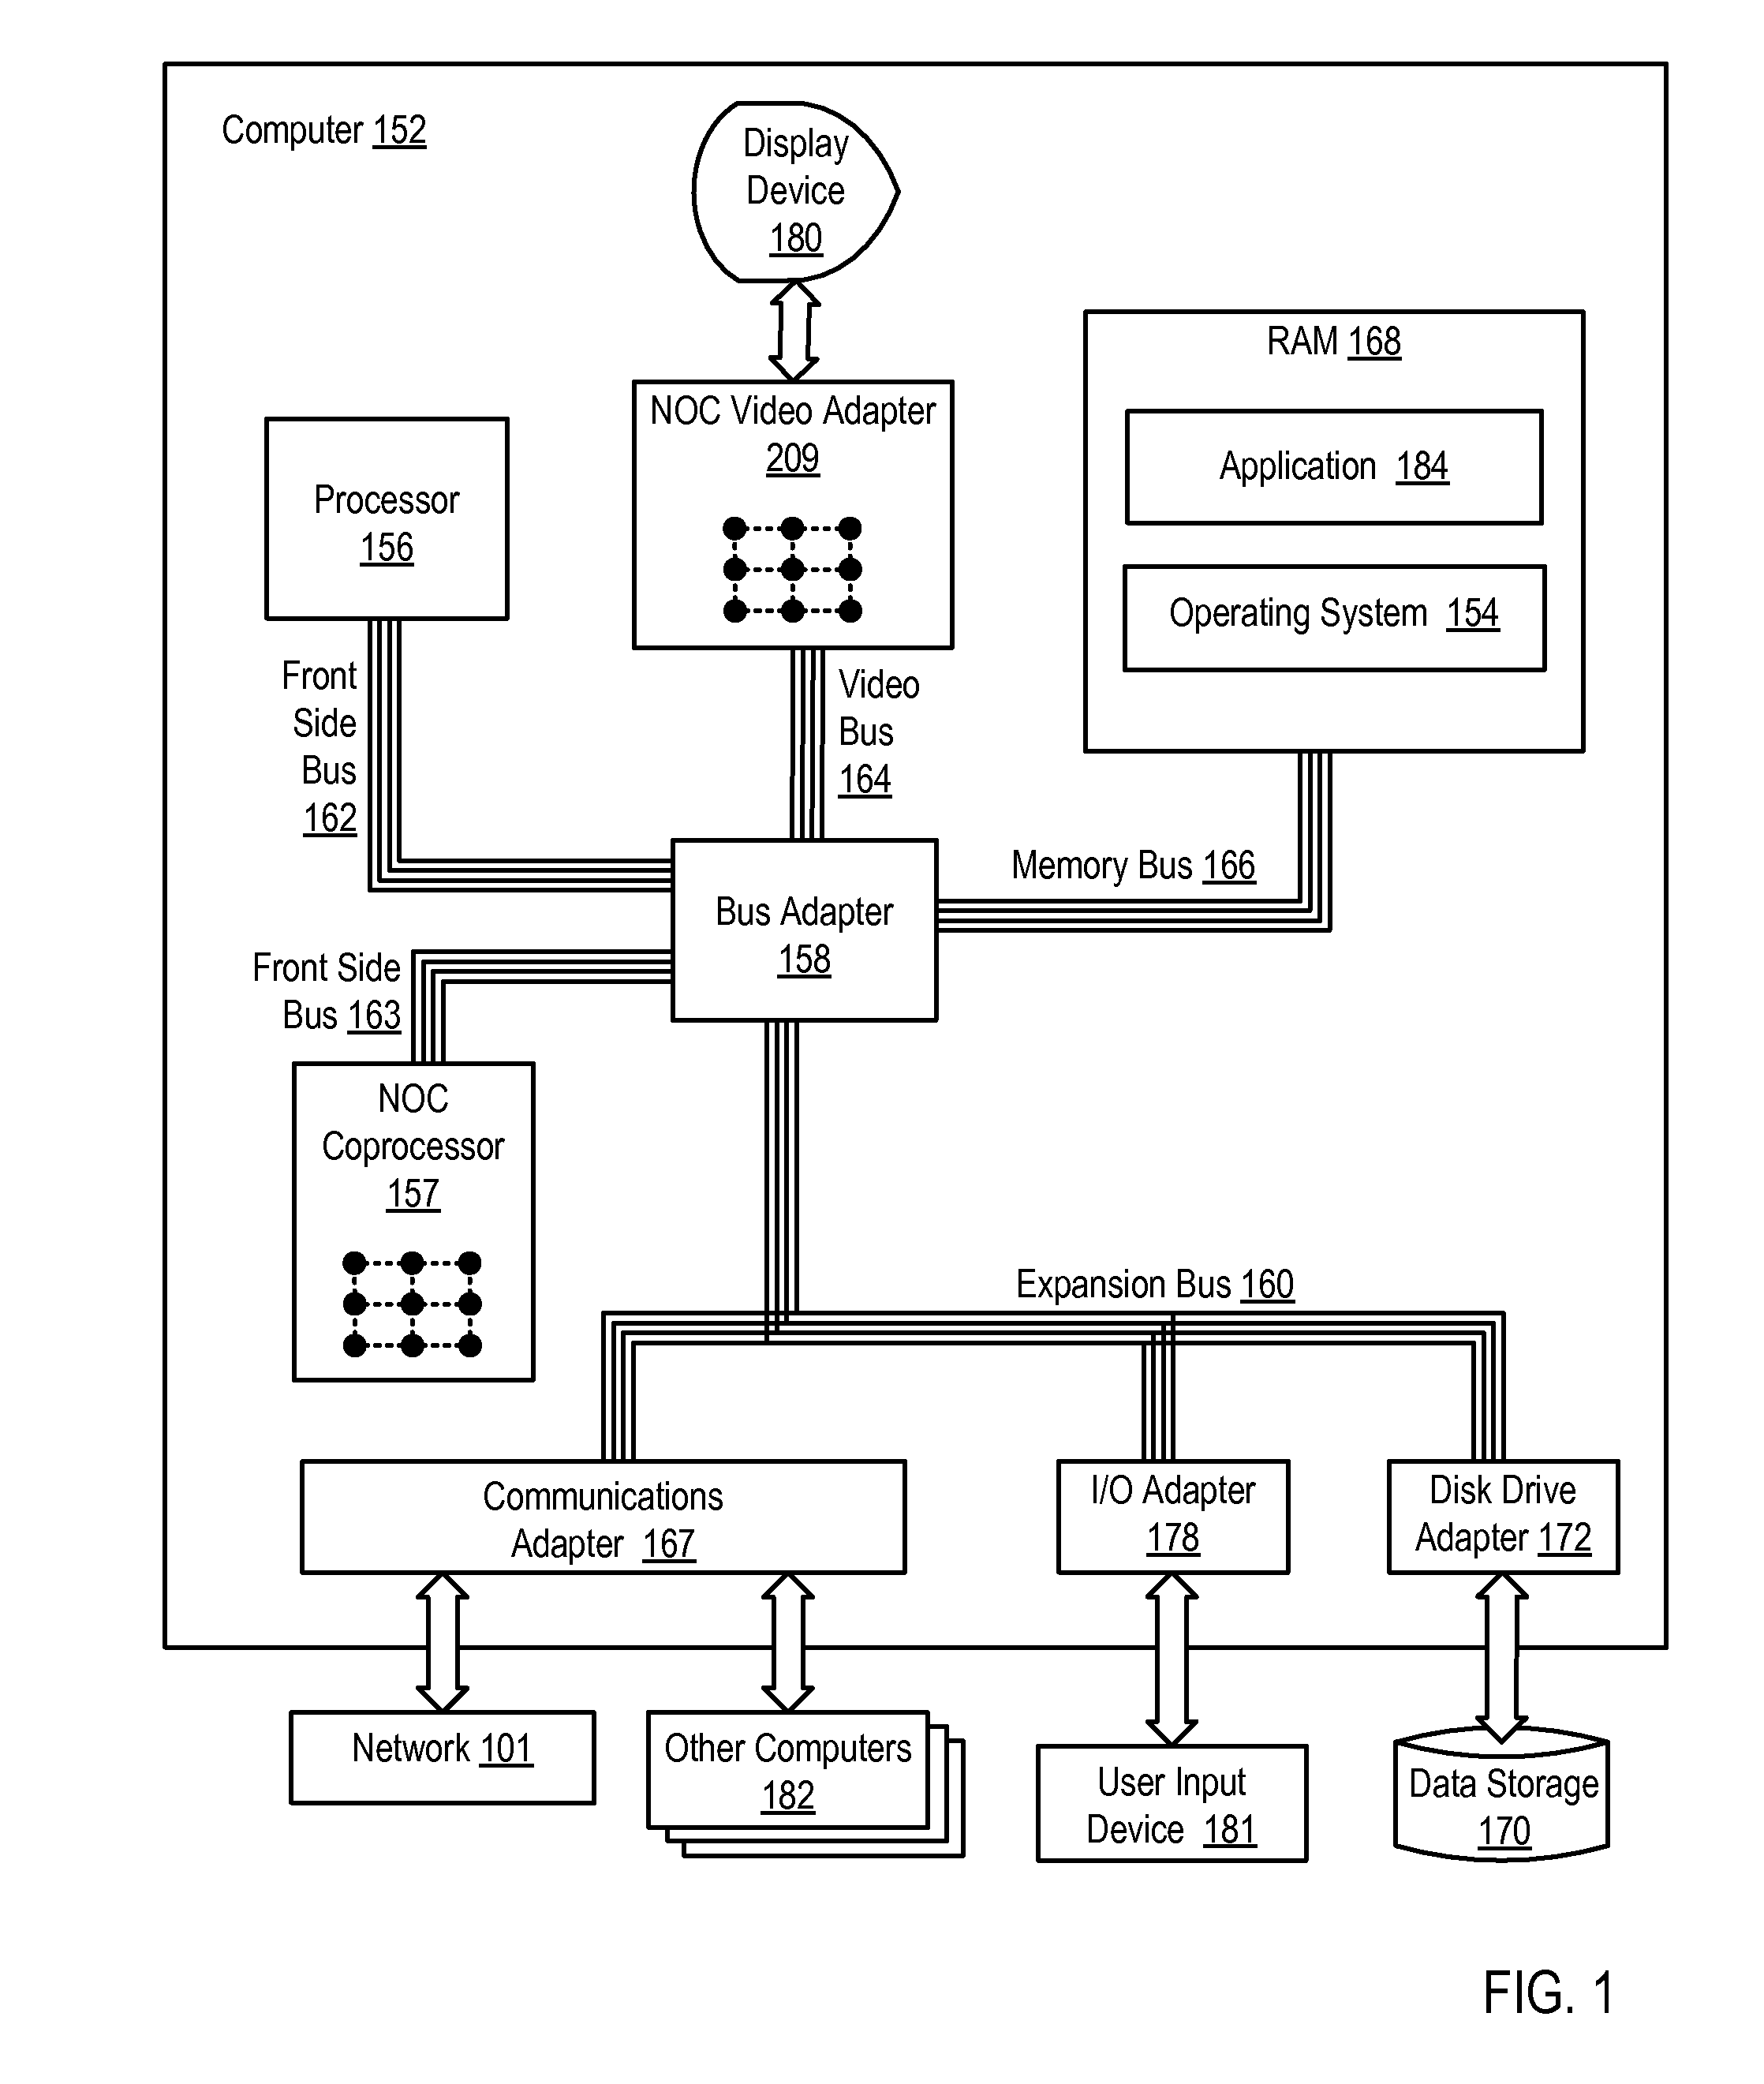 Monitoring software pipeline performance on a network on chip